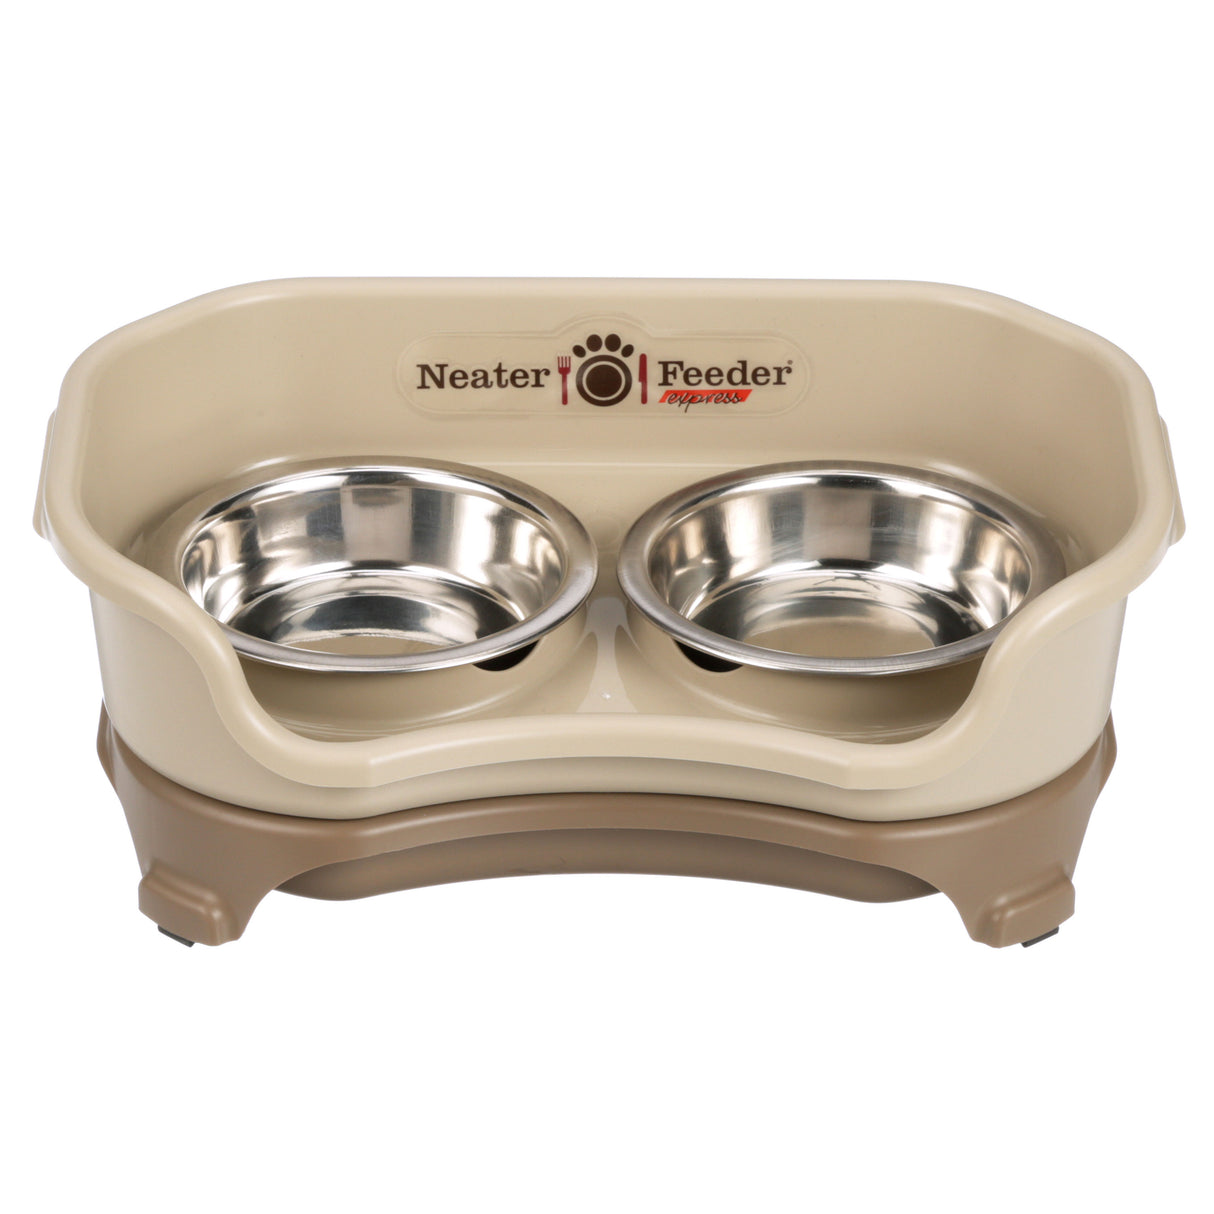 Express cat Neater Feeder in Cappuccino